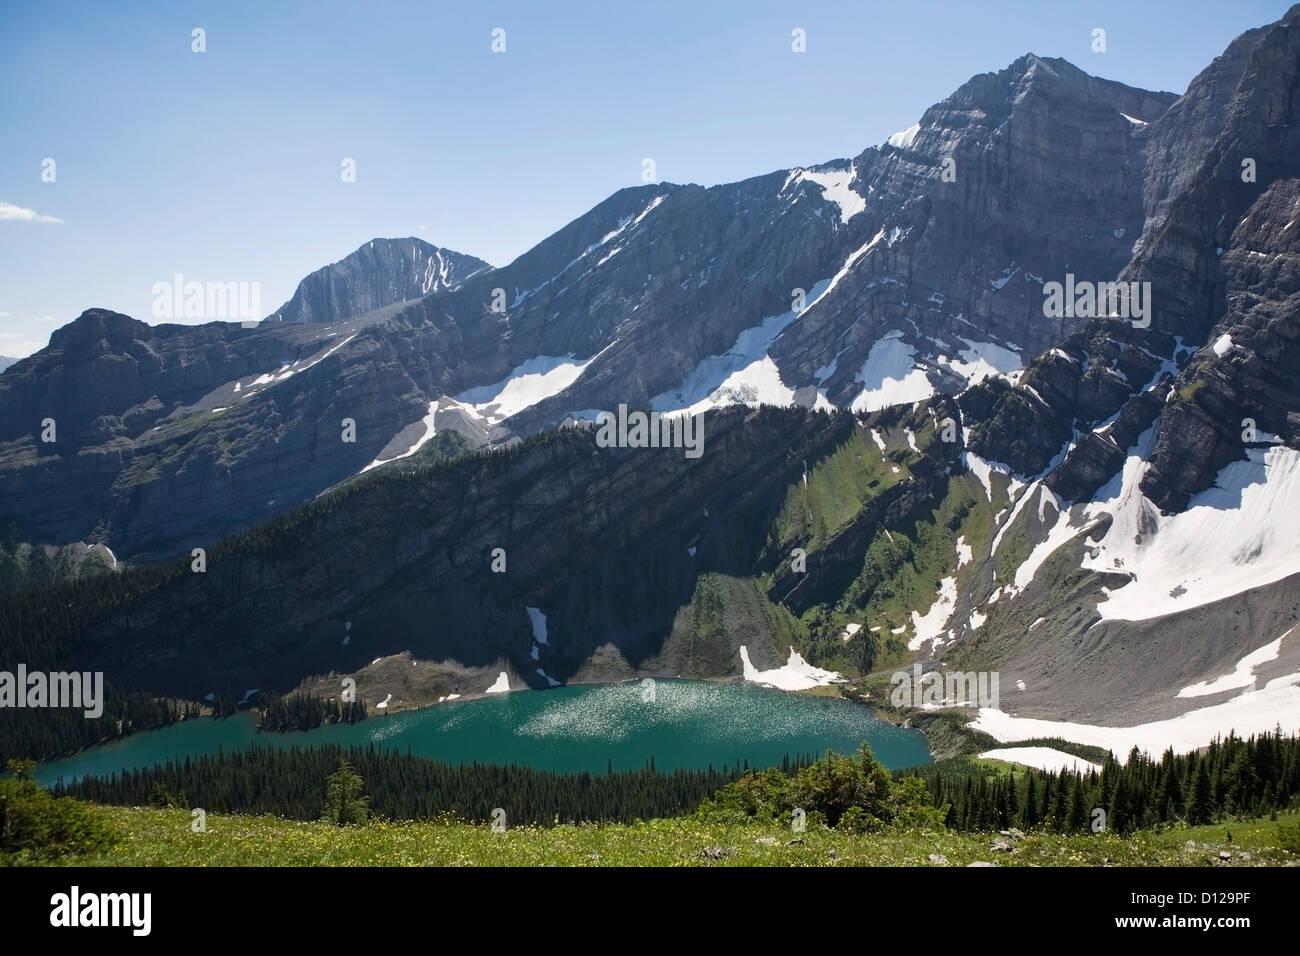 Mountain Lake Surrounded By Mountains With Snow From On Top Of A Wildflower Mountain Meadow; Kananaskis Provincial Park, Alberta Stock Photo